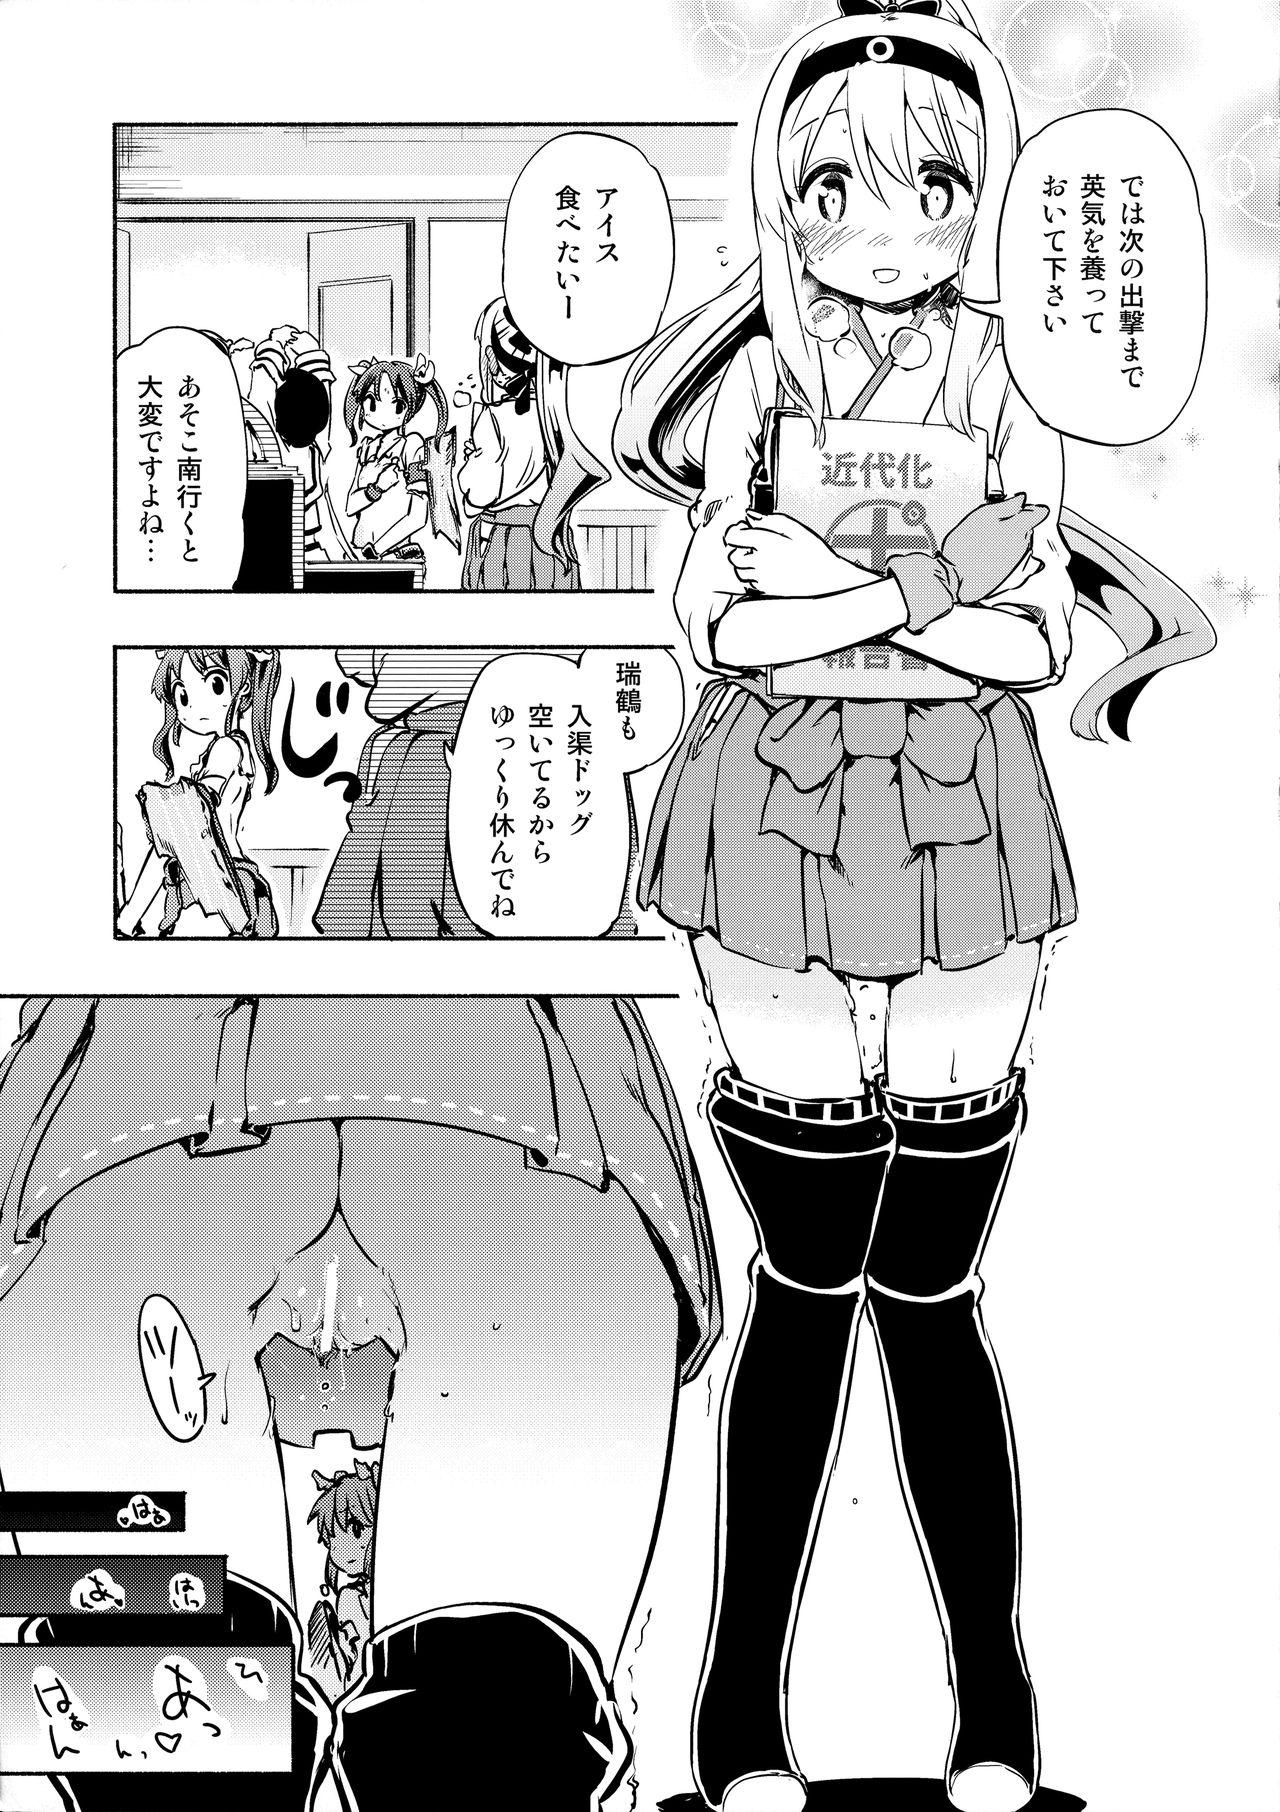 Sperm Ponyta - Kantai collection Missionary - Page 6